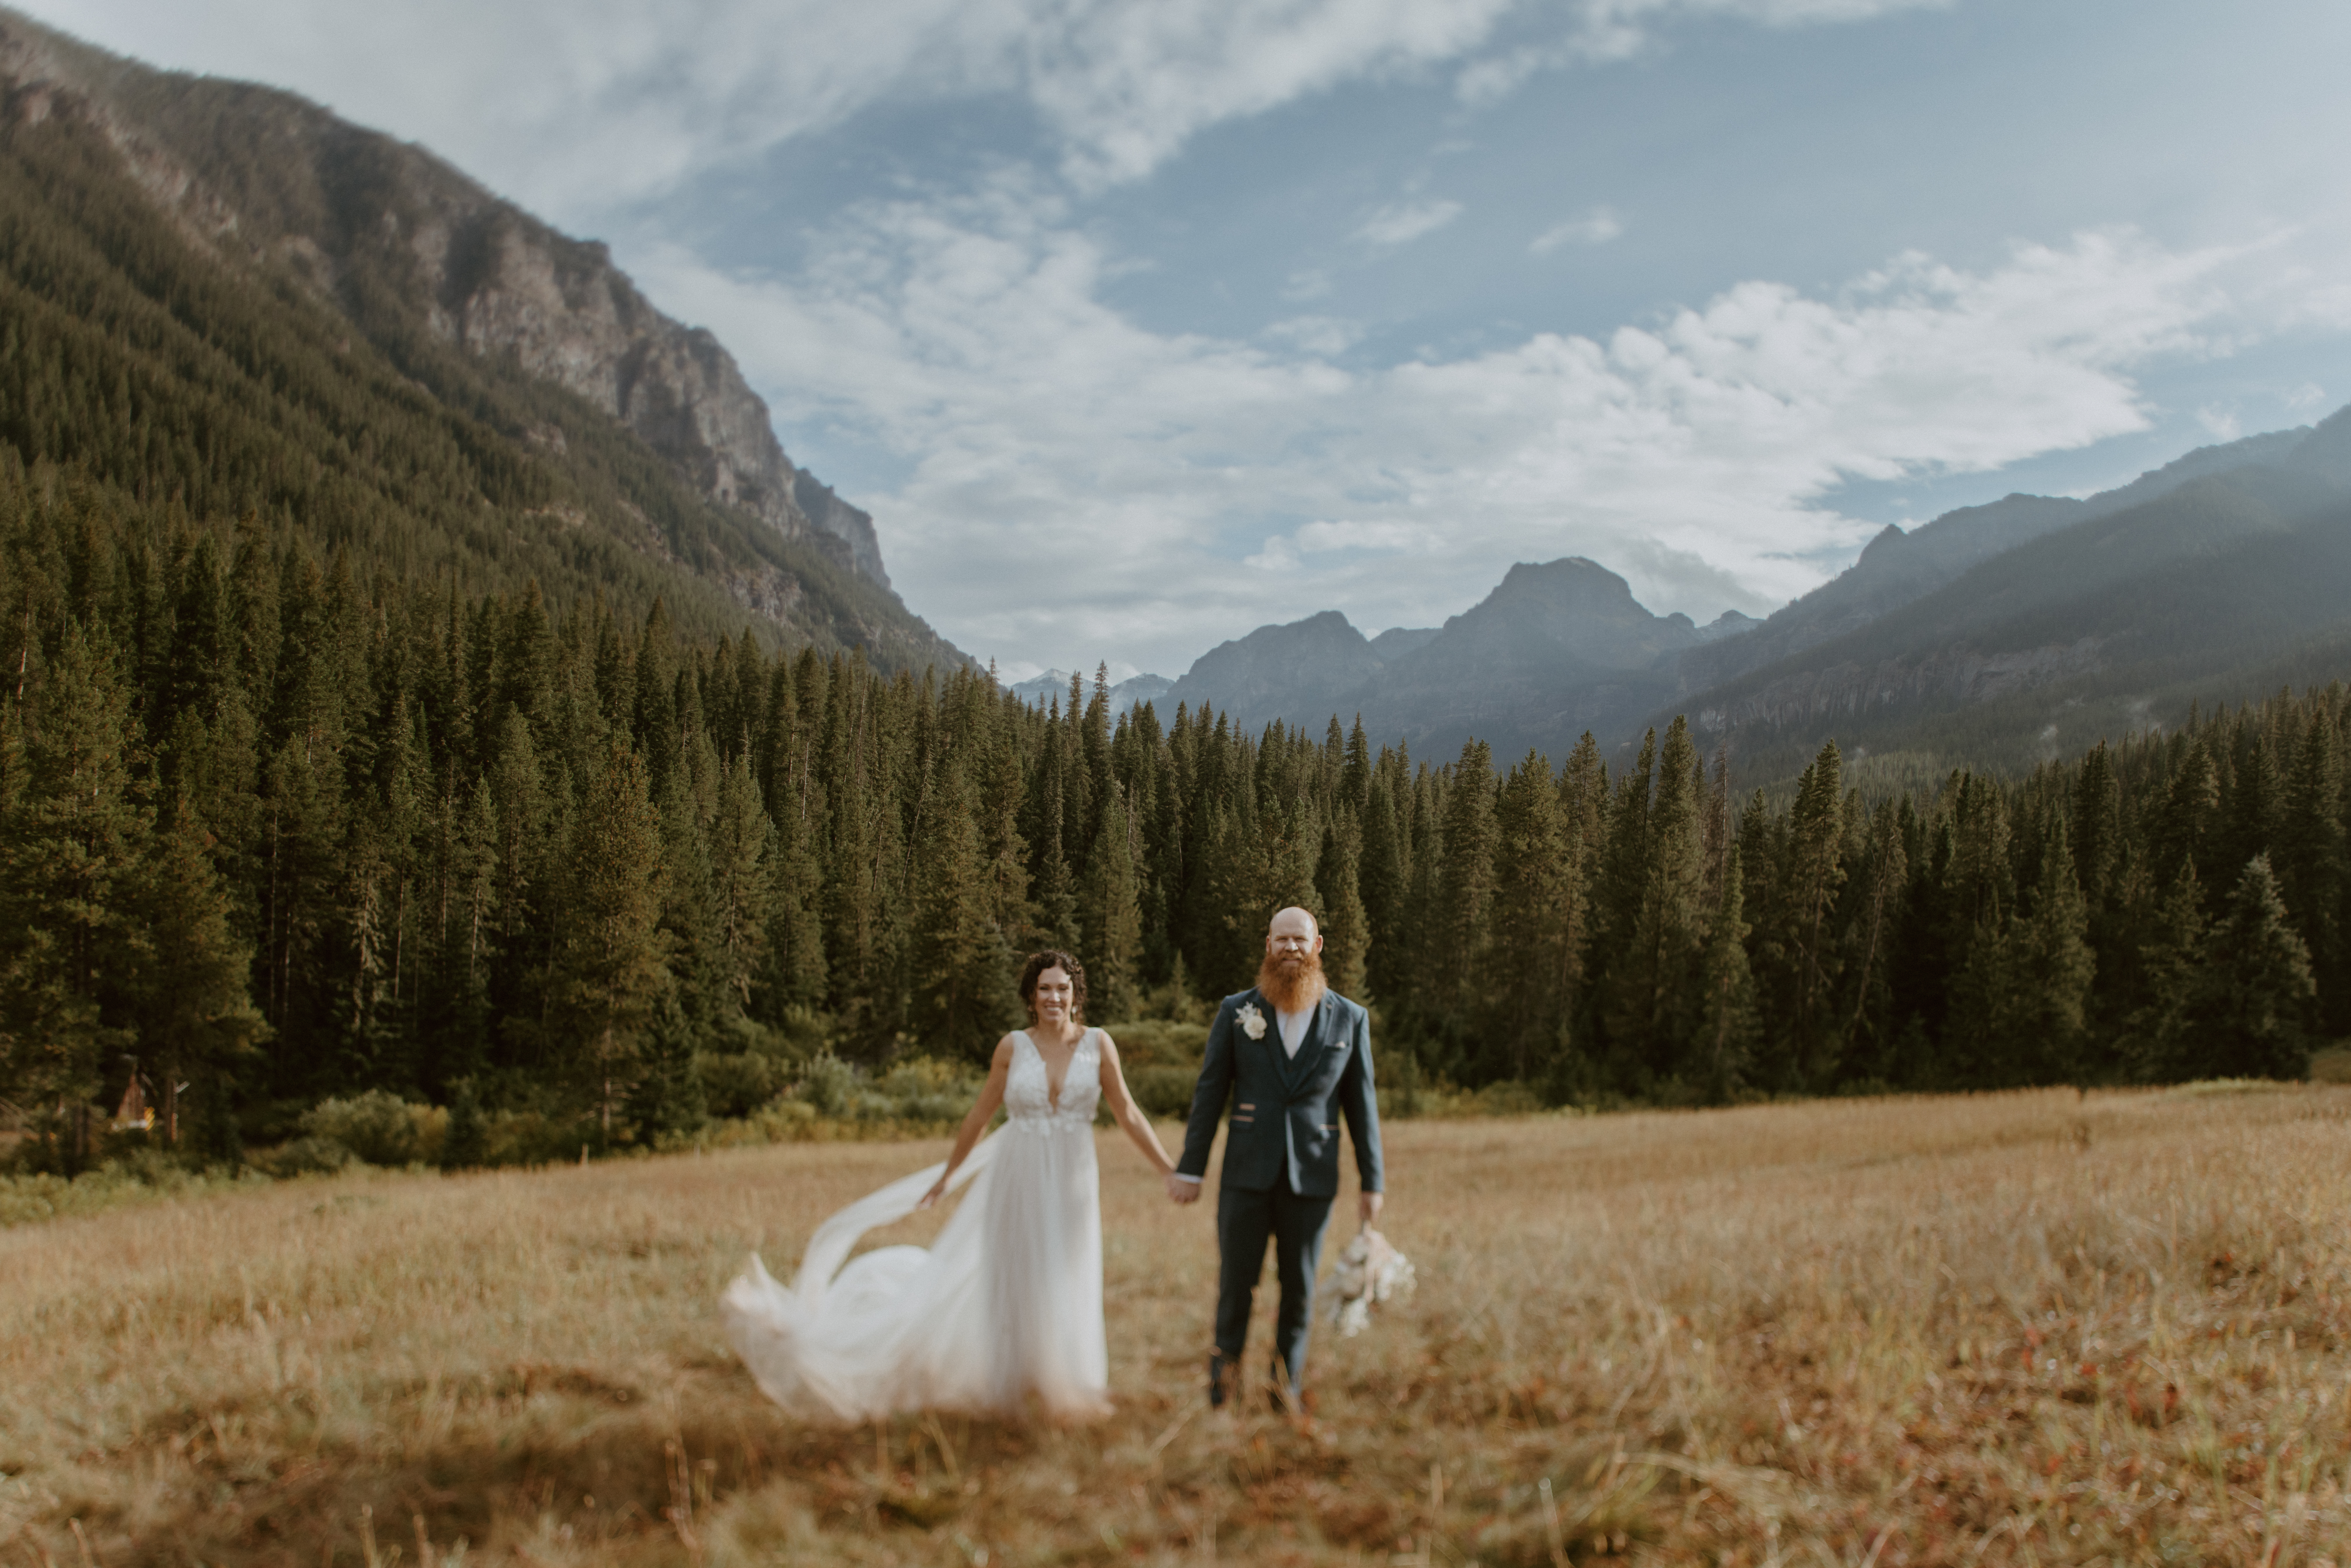 The perfect sunkissed evening for the fall mountain wedding giving epic views